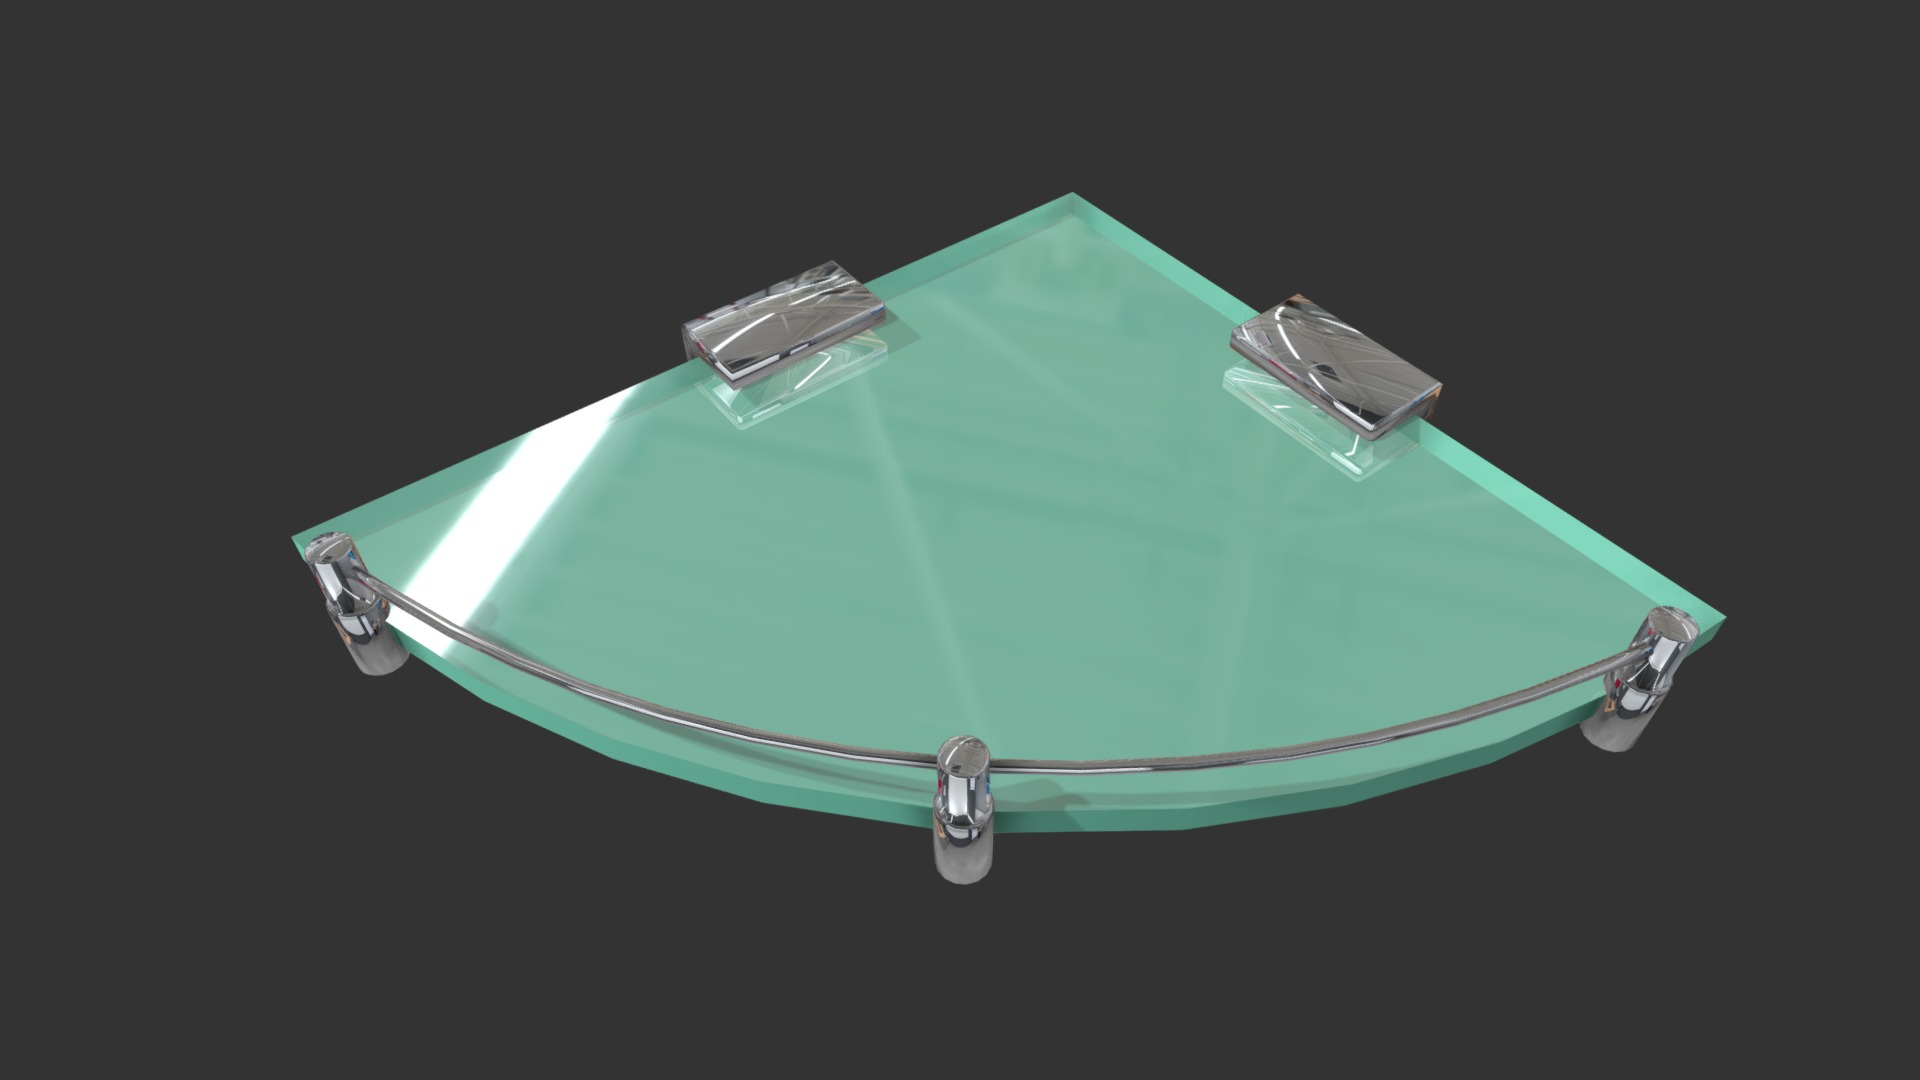 3D model DQ1080 - This is a 3D model of the DQ1080. The 3D model is about a green rectangular object with a metal bar on top.